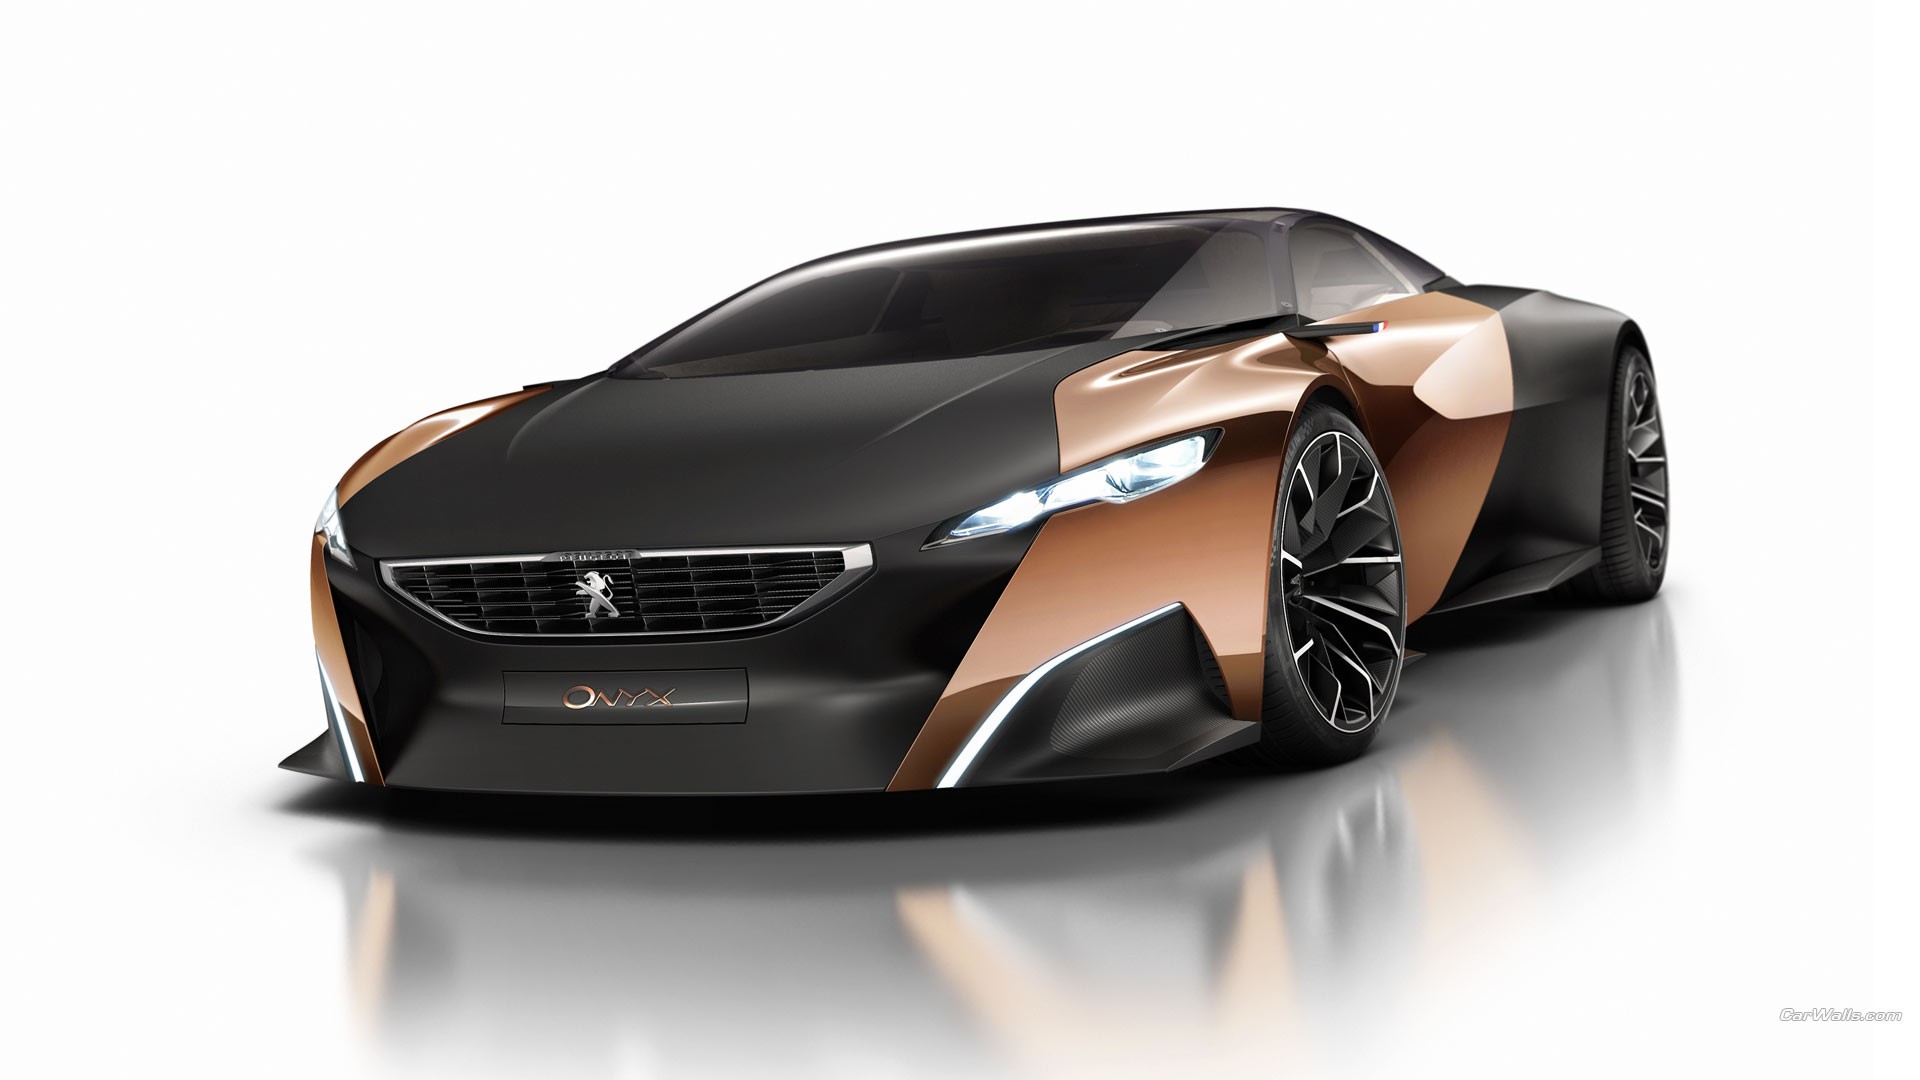 General 1920x1080 Peugeot Onyx car Peugeot vehicle simple background white background concept cars French Cars Stellantis